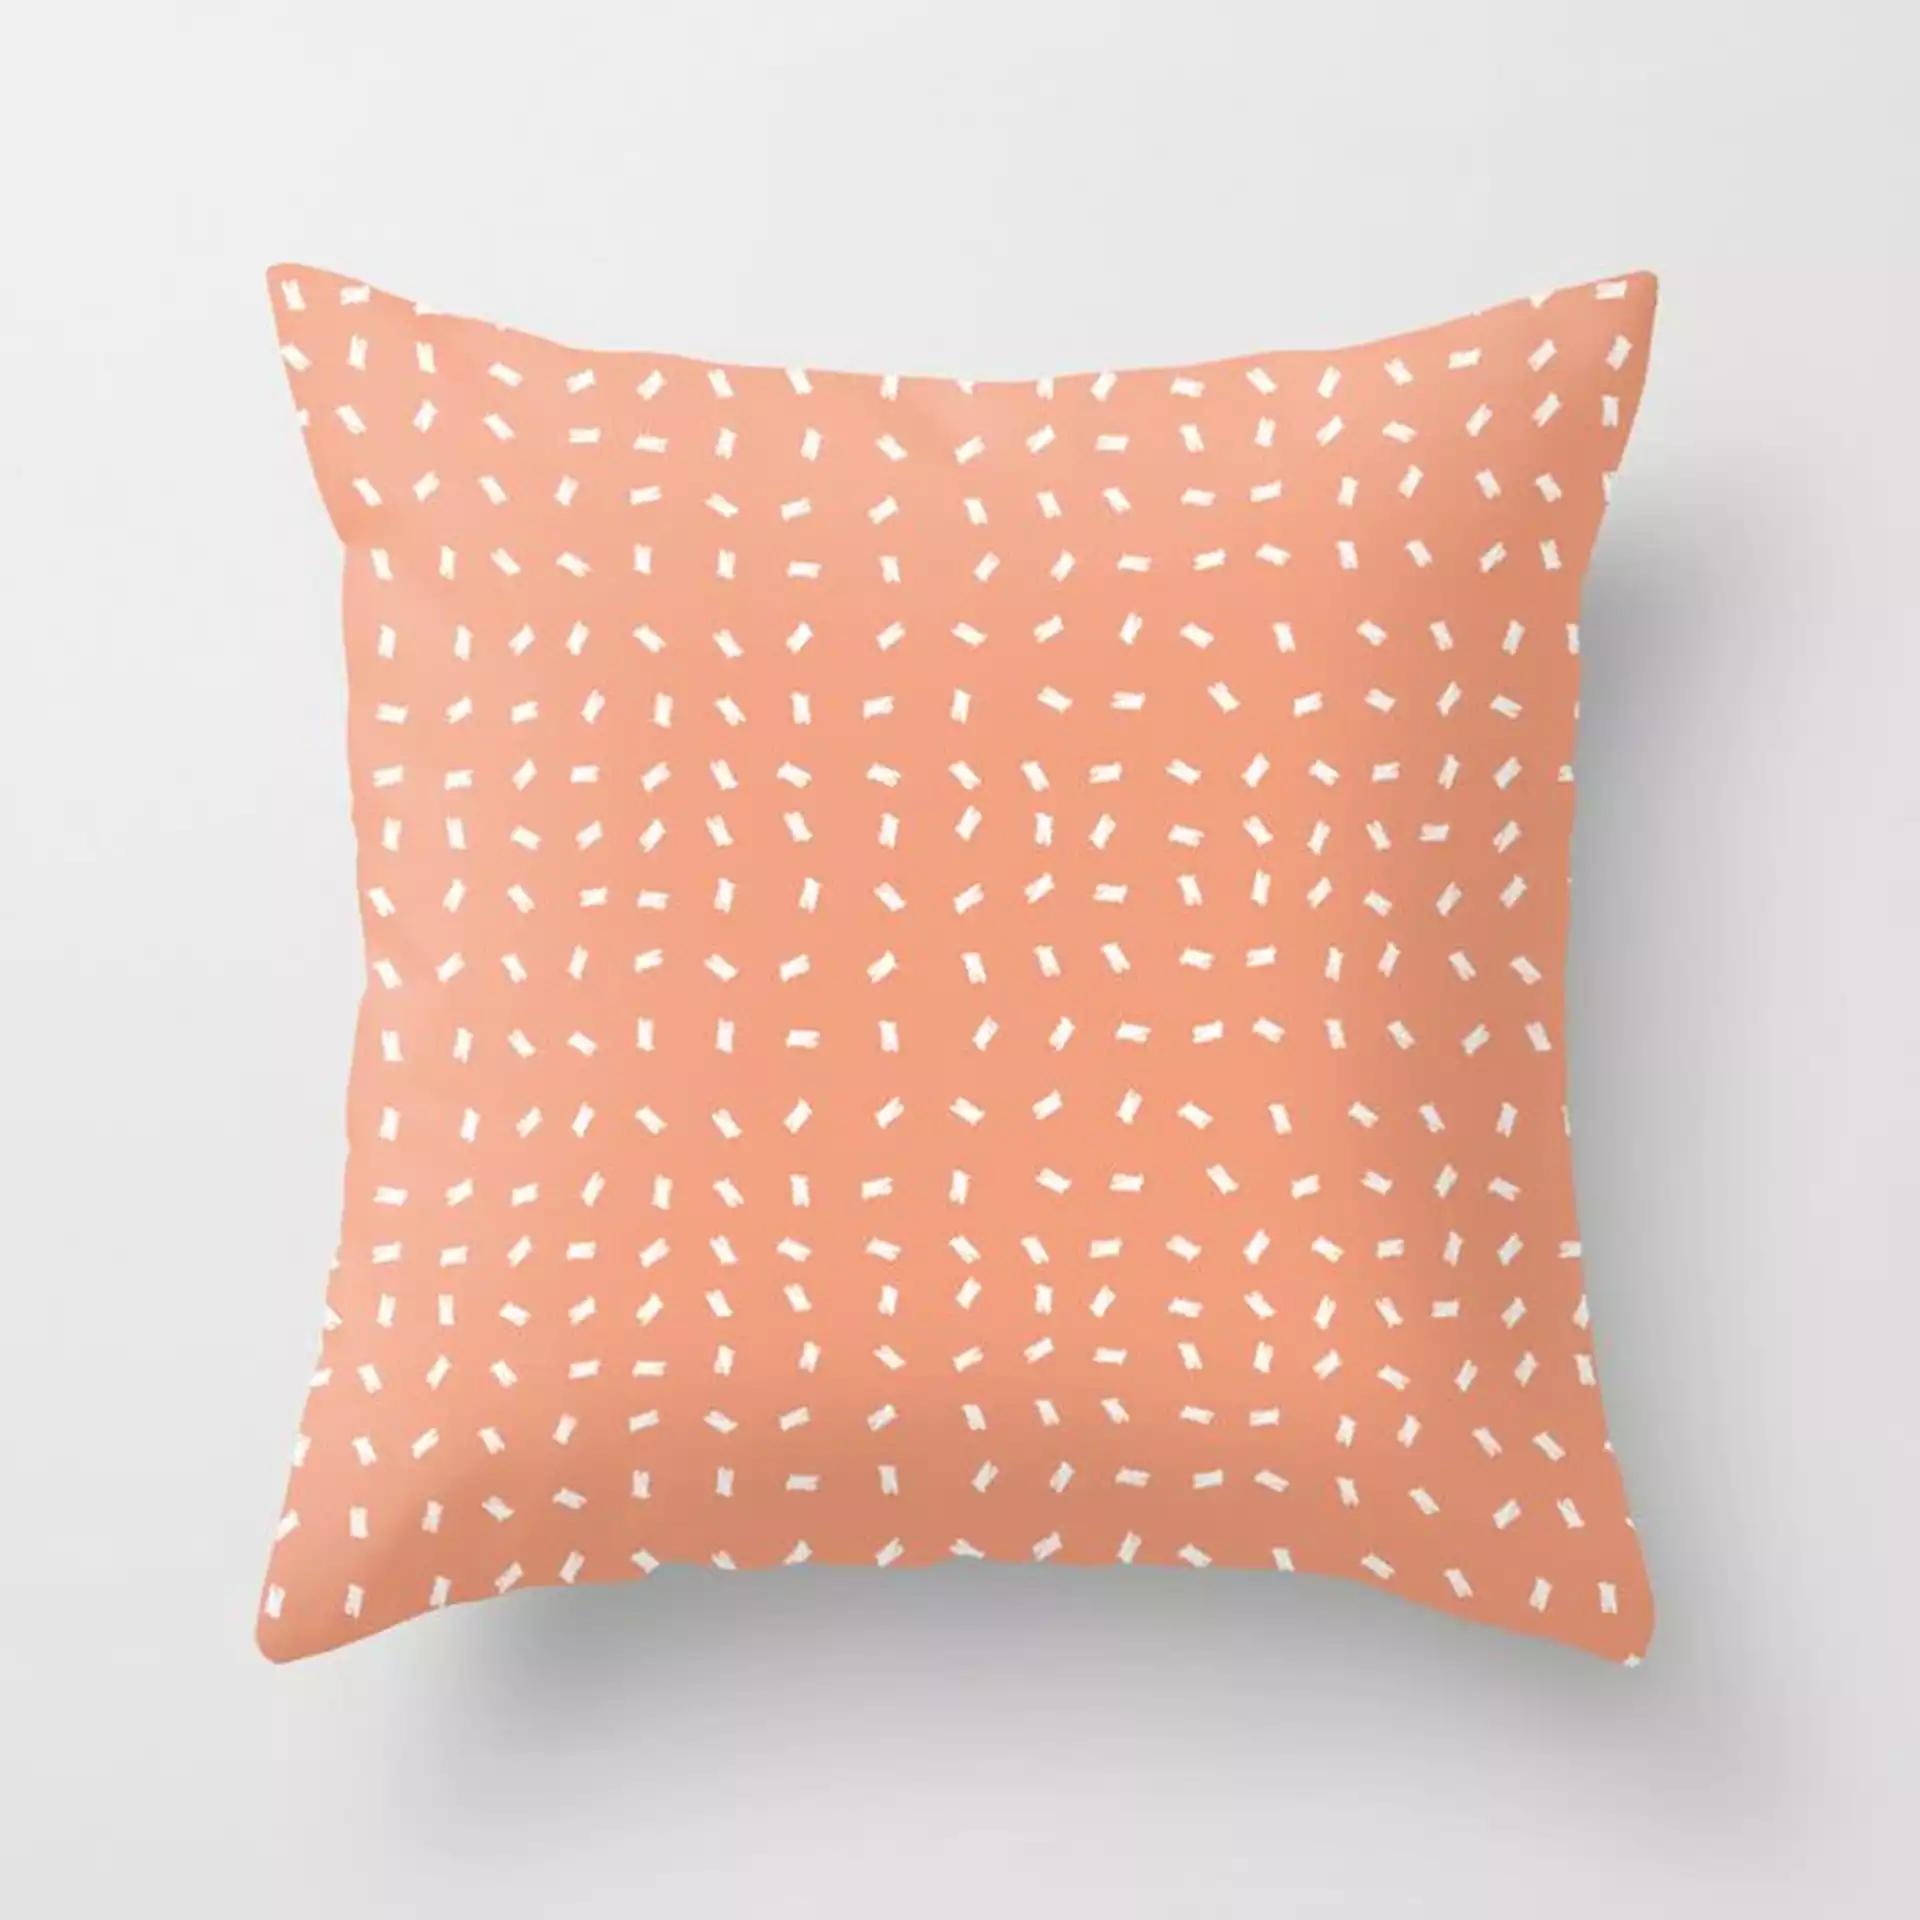 Peach Confetti Party Couch Throw Pillow by Leah Flores - Cover (24" x 24") with pillow insert - Indoor Pillow